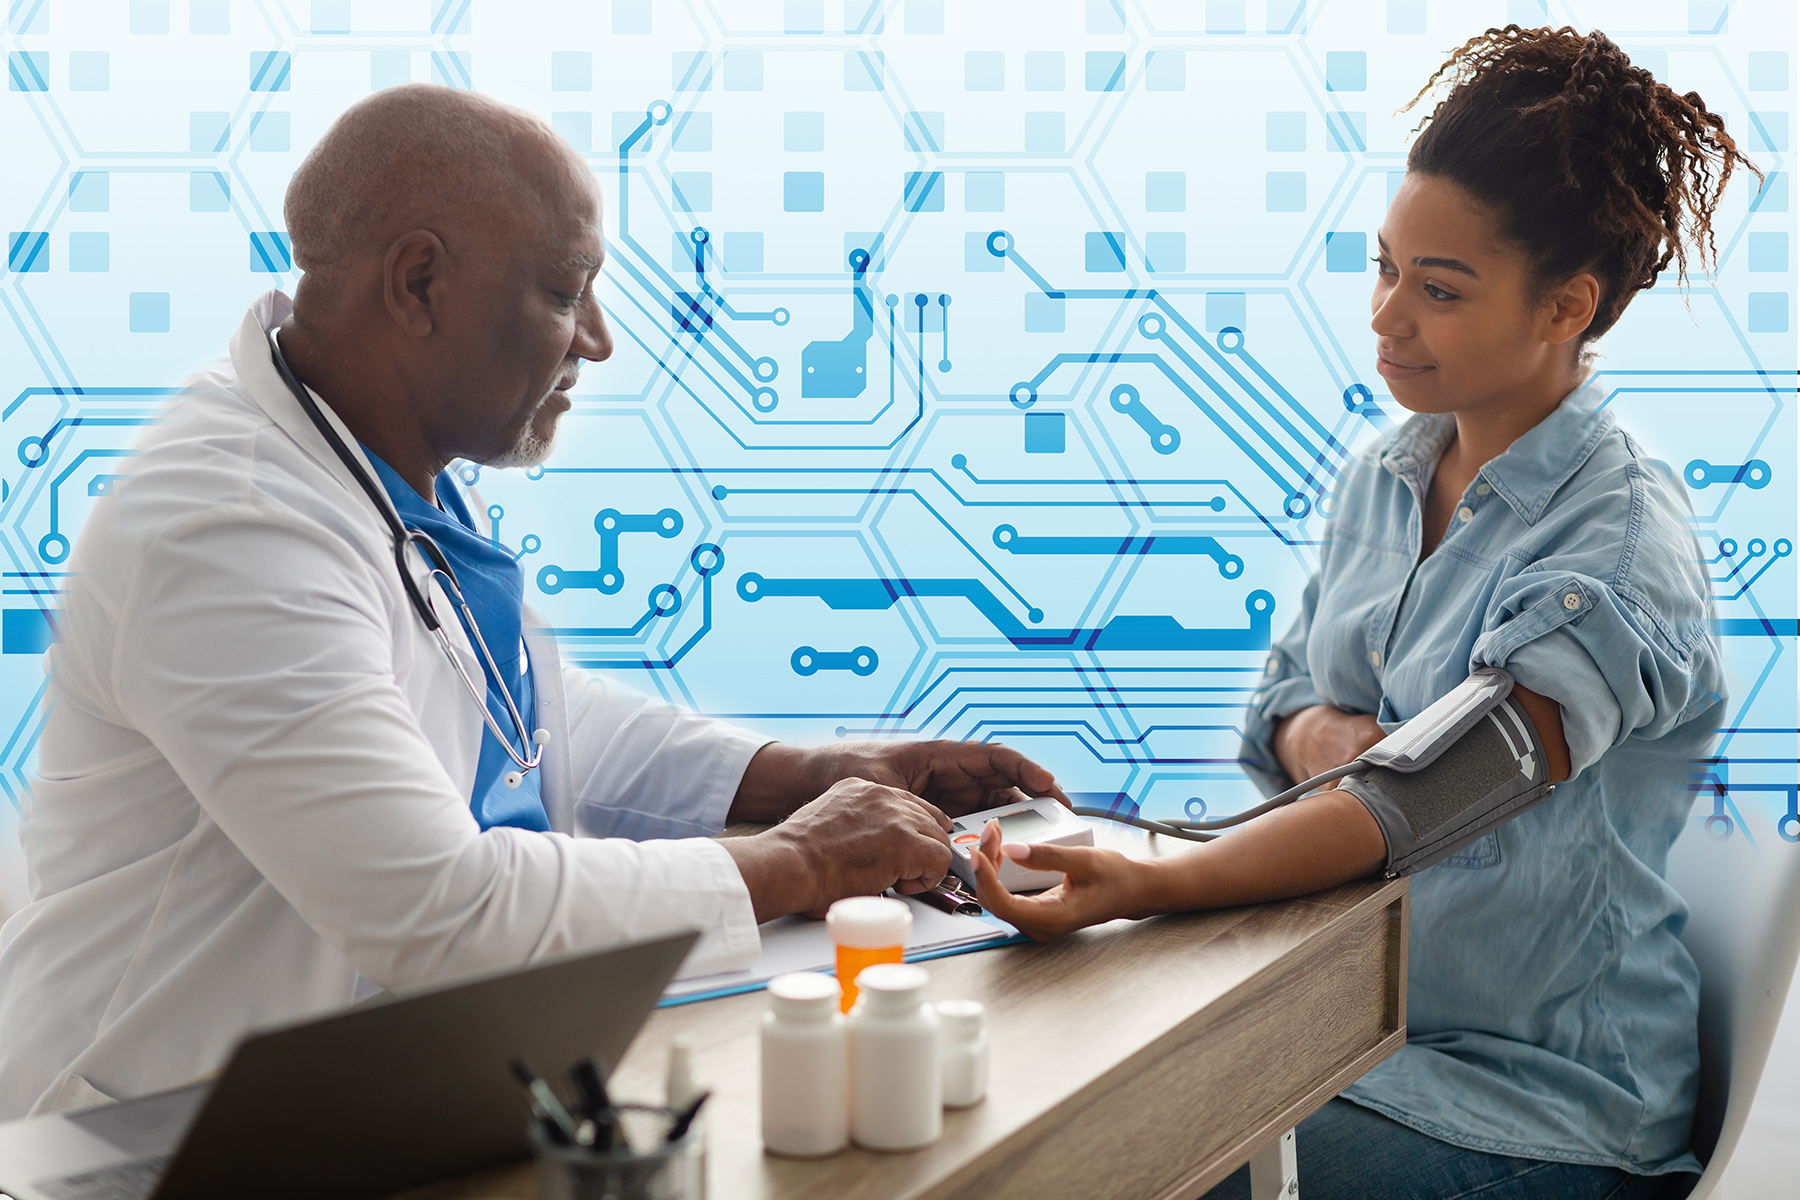 A black doctor takes the blood pressure of a black pregnant woman. The background is a blue technology concept - meant to convey the idea of supercomputers aiding in pre-natal care research.